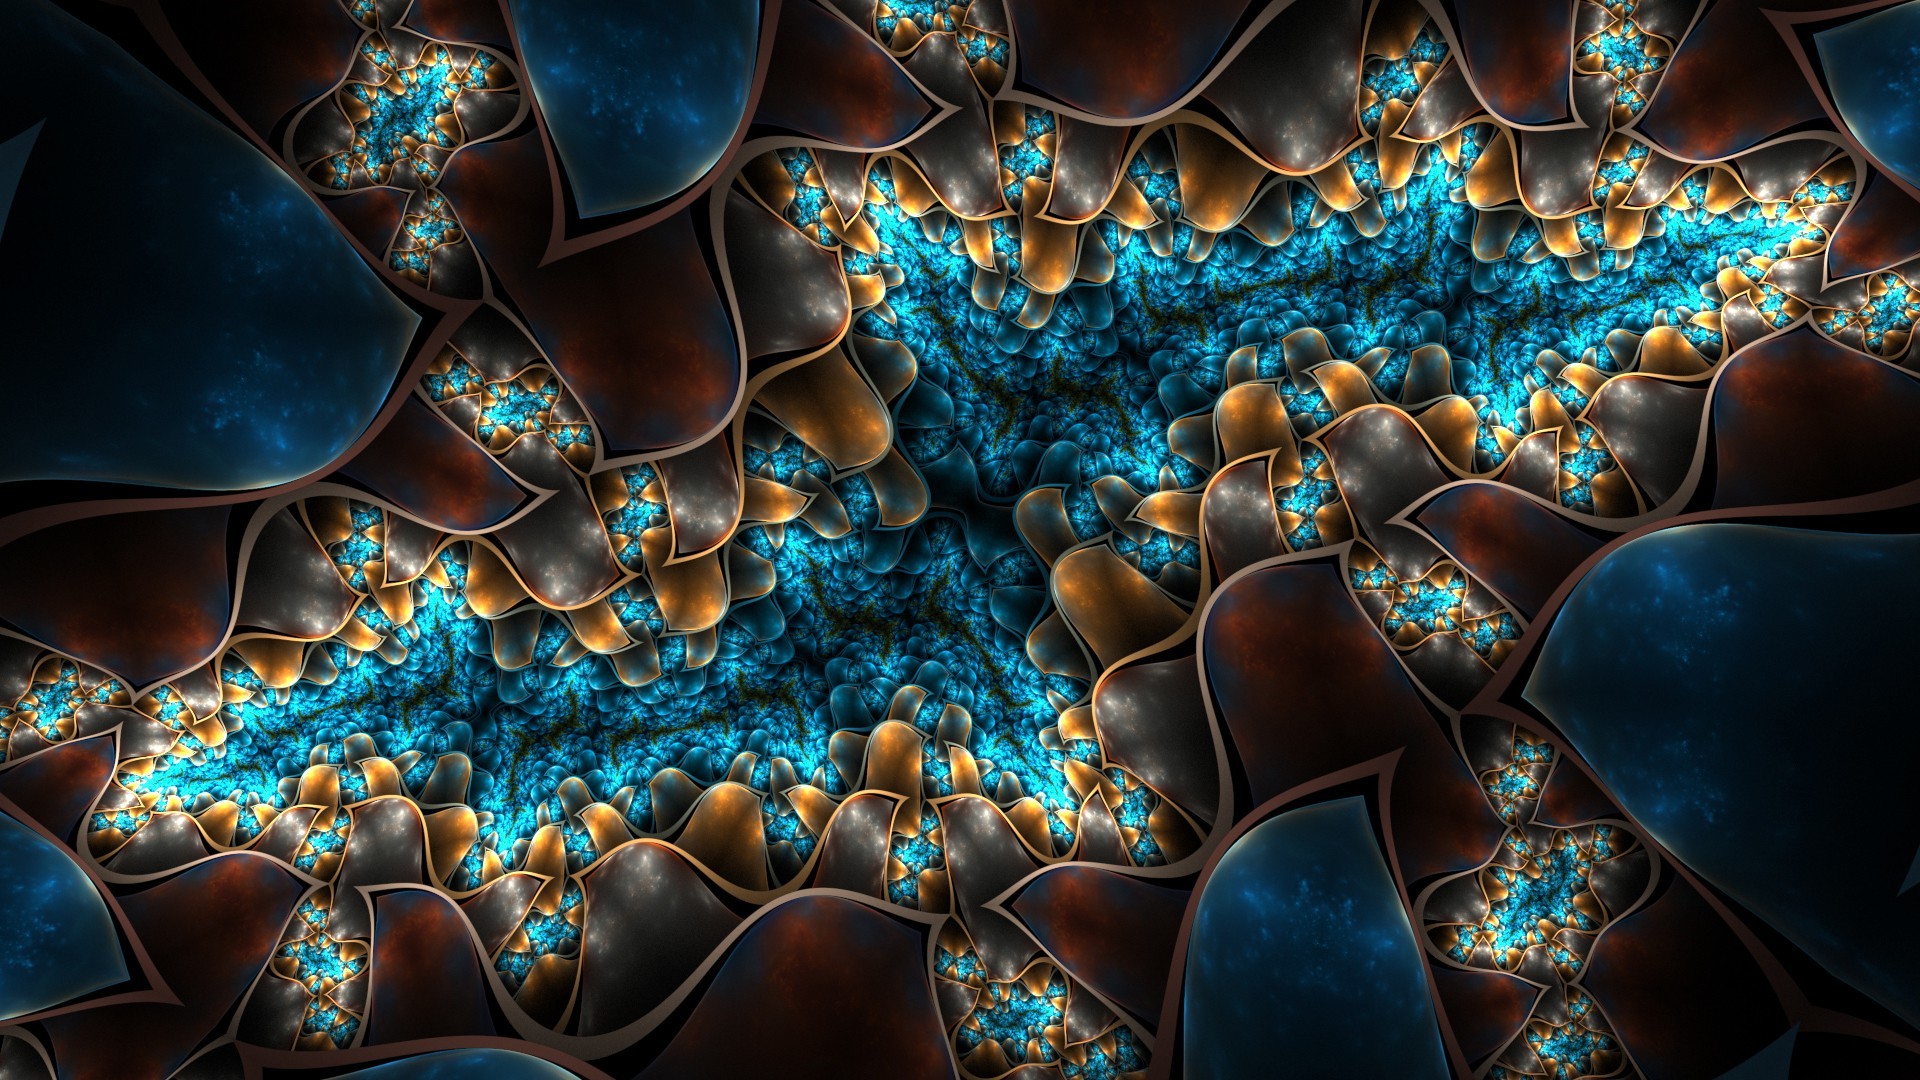 1920x1080 Abstract Fractal wallpapers (Desktop, Phone, Tablet) - Awesome .